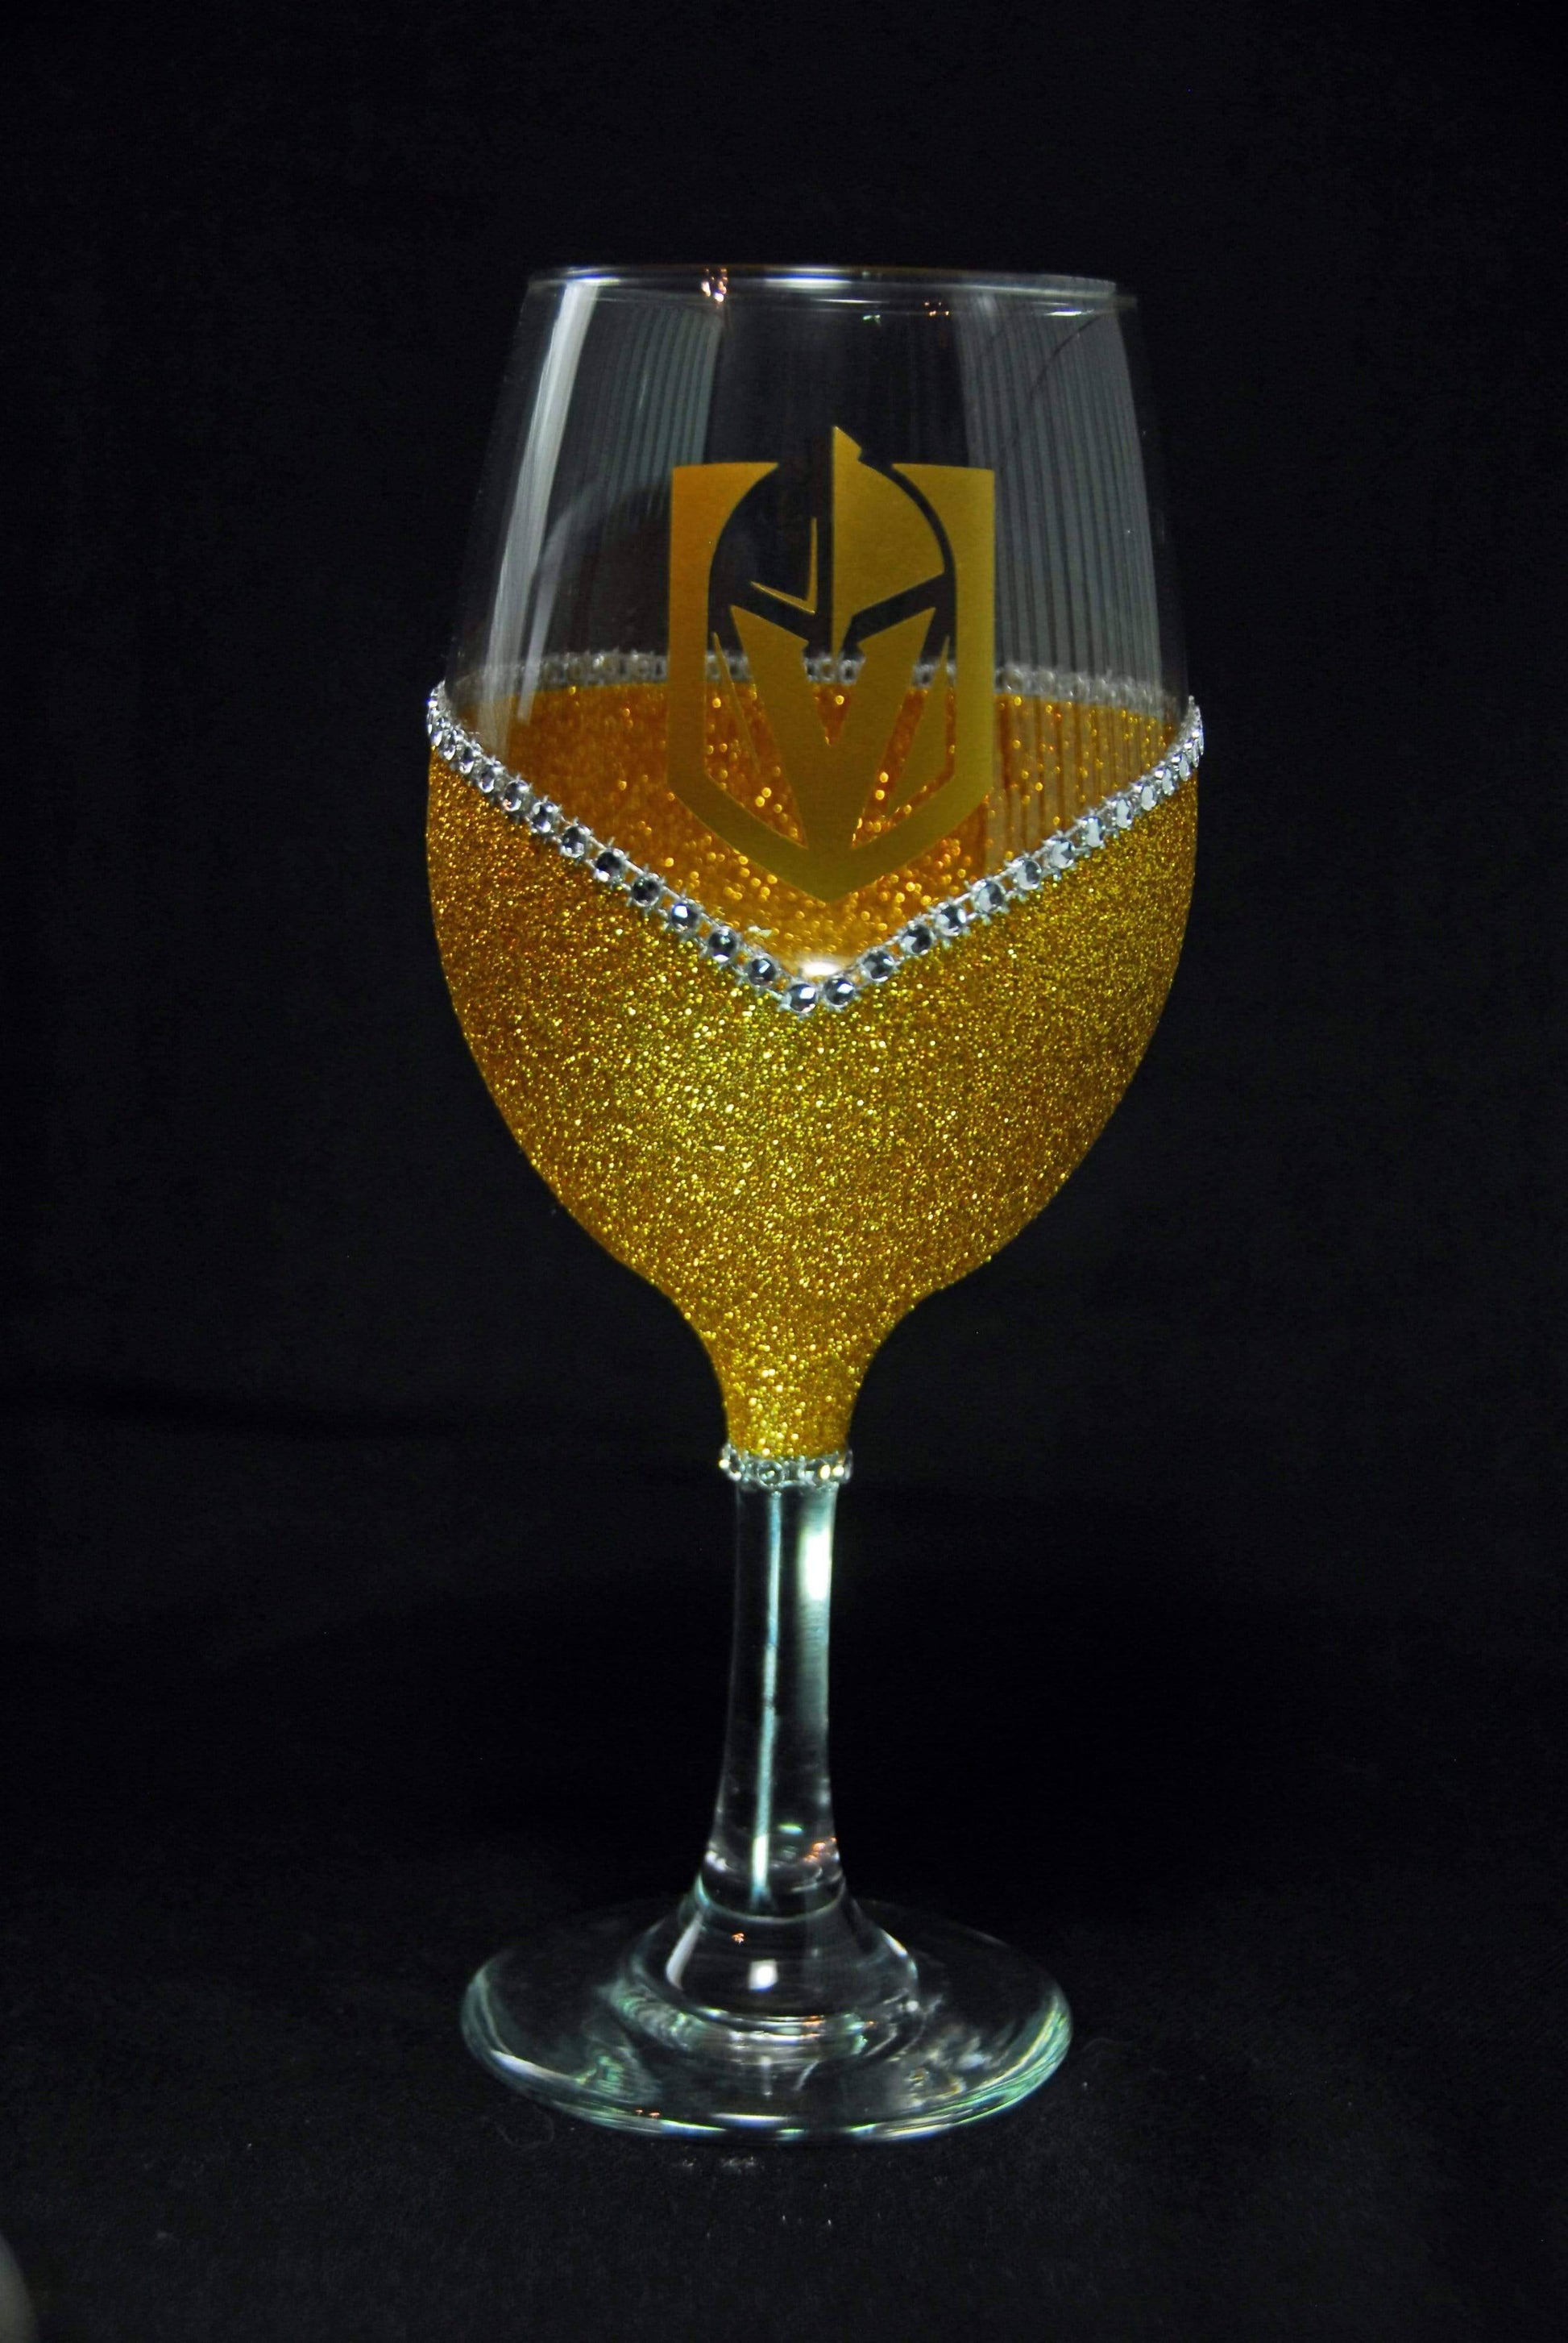 Classy Glassy LV Golden Knights "Bling" V Style Wine Glasses-Choose your color - Winey Bitches - Wine- Women- K9's